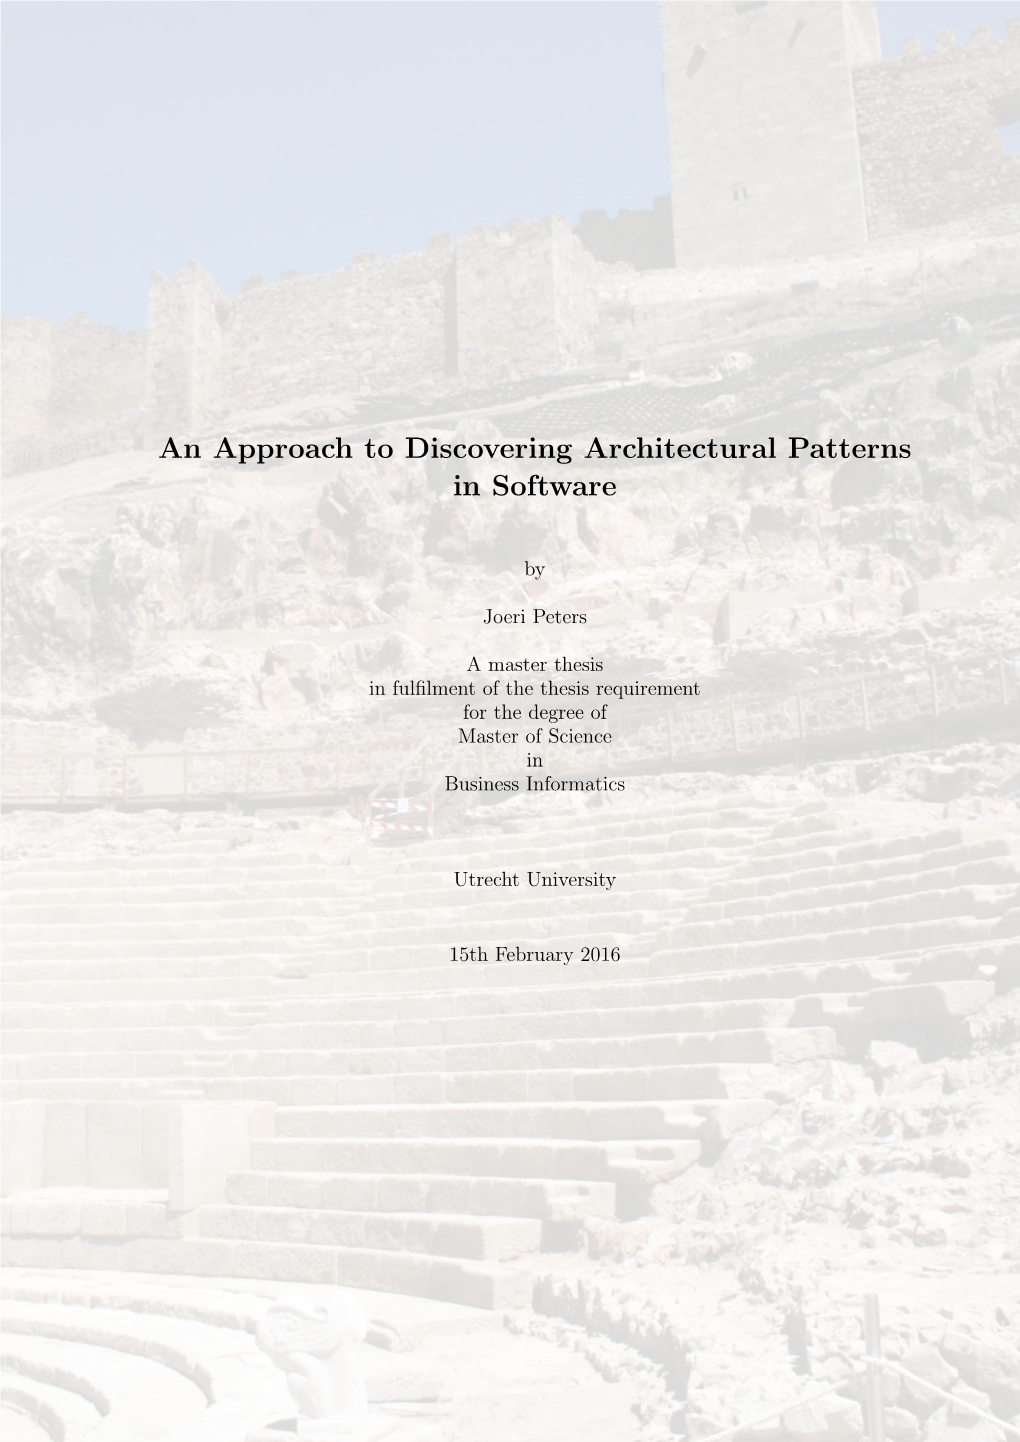 An Approach to Discovering Architectural Patterns in Software